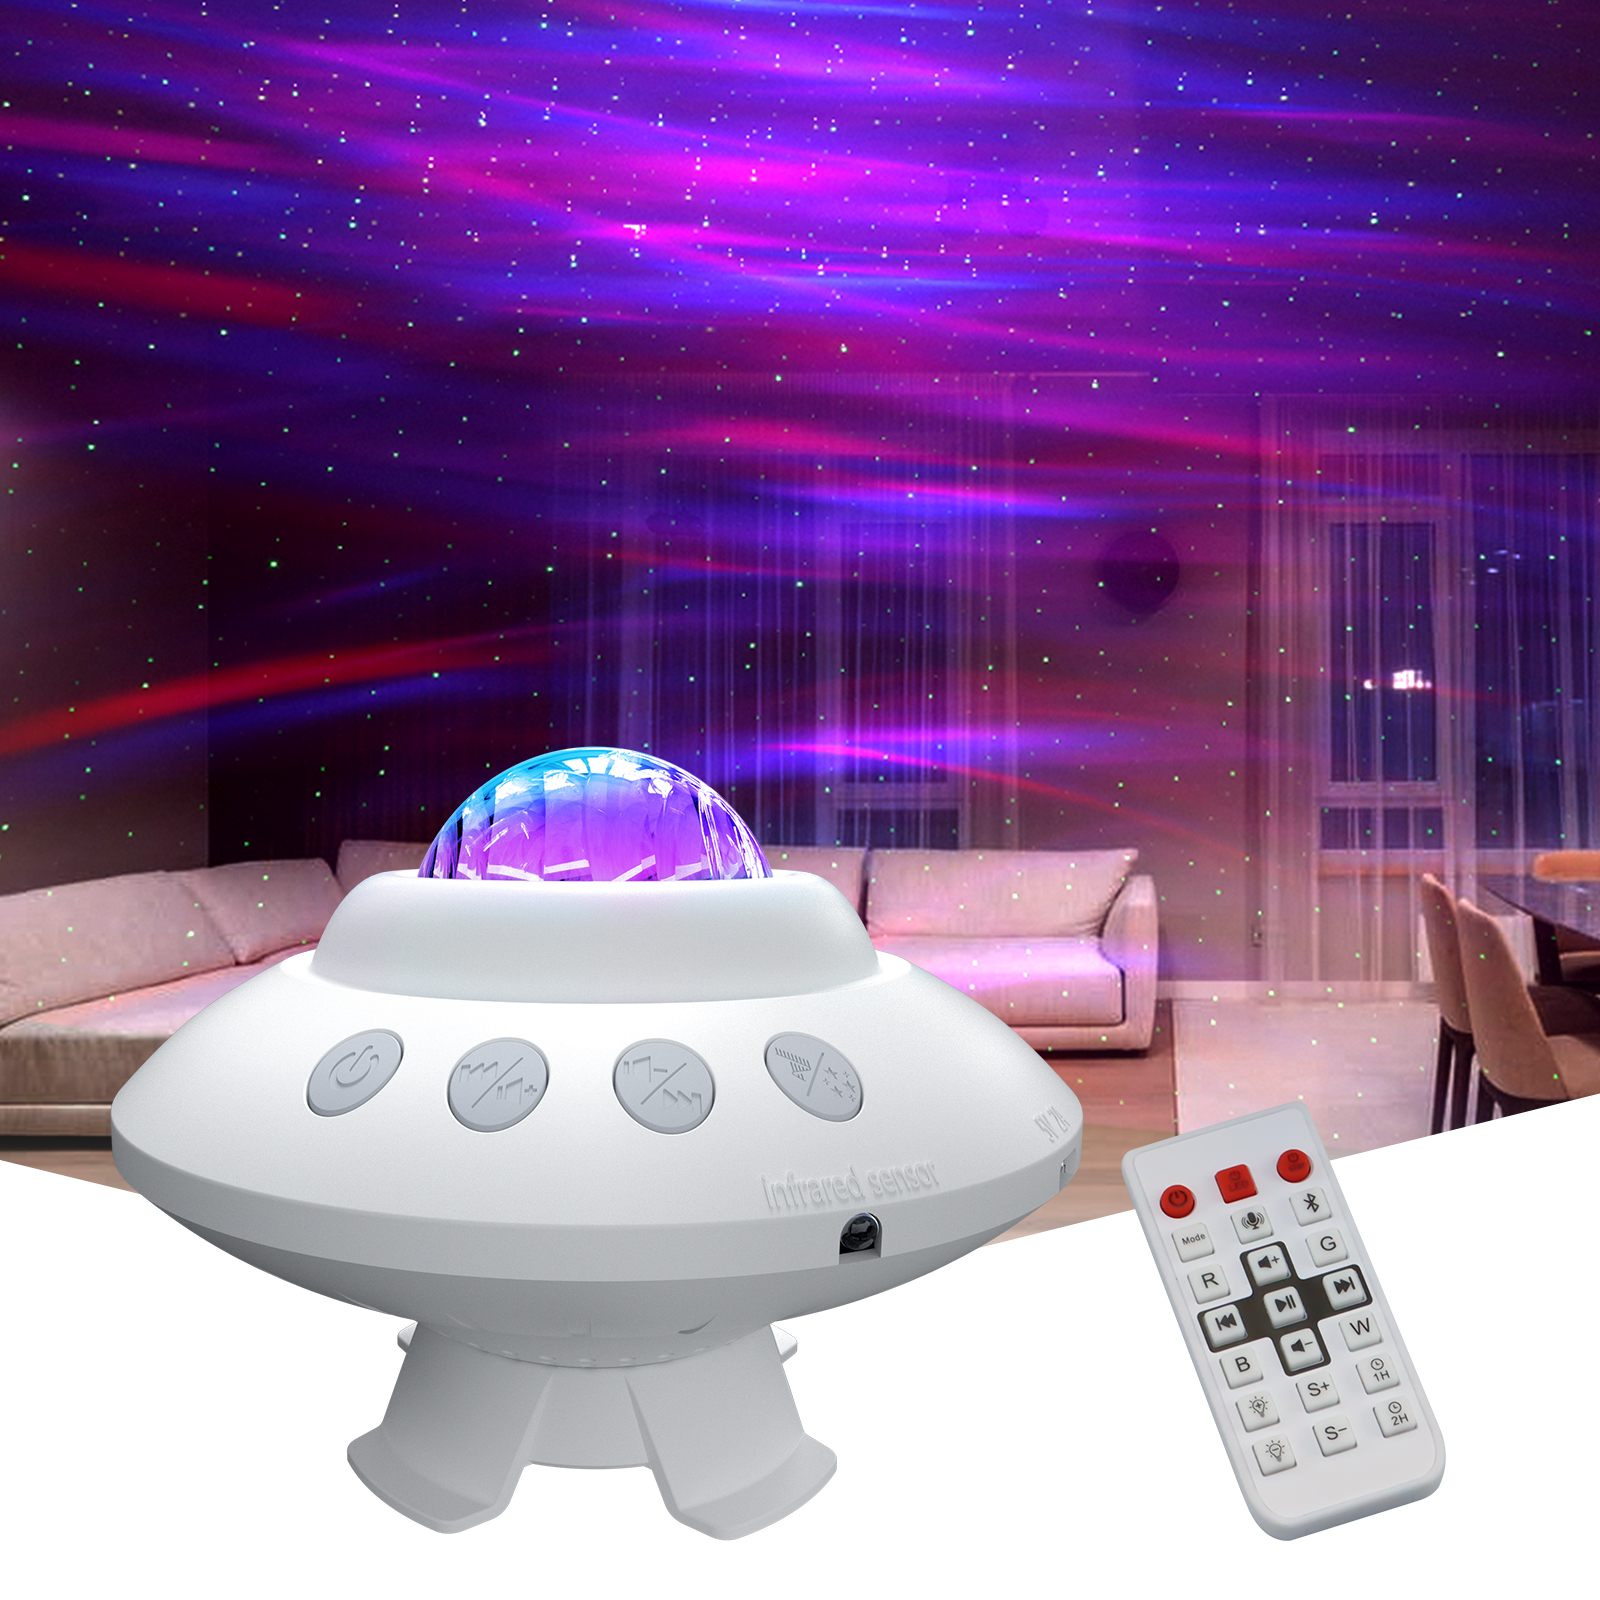 Fcoreey Star Projector Night Light,Aurora Galaxy Starry Projector Built in Bluetooth Speaker Timer, Remote Control Adjustable Brightness Angle Speed for Kids Adults Bedroom Christmas Party Decor